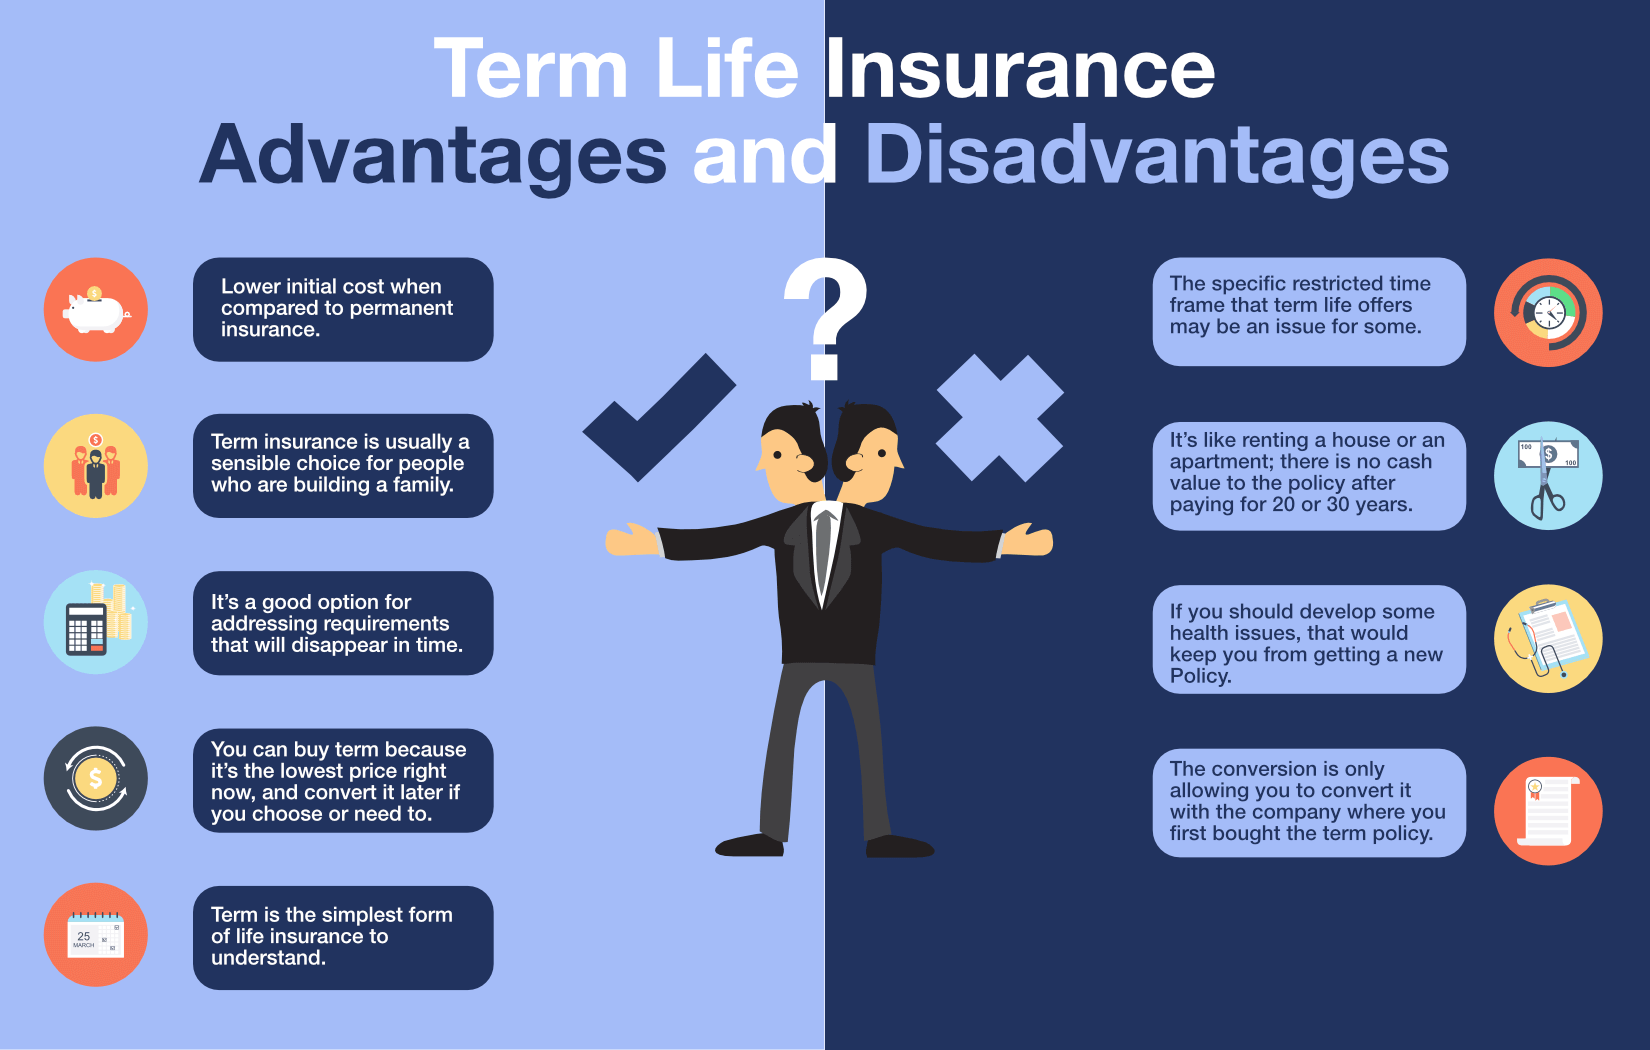 Does term life insurance provide value?